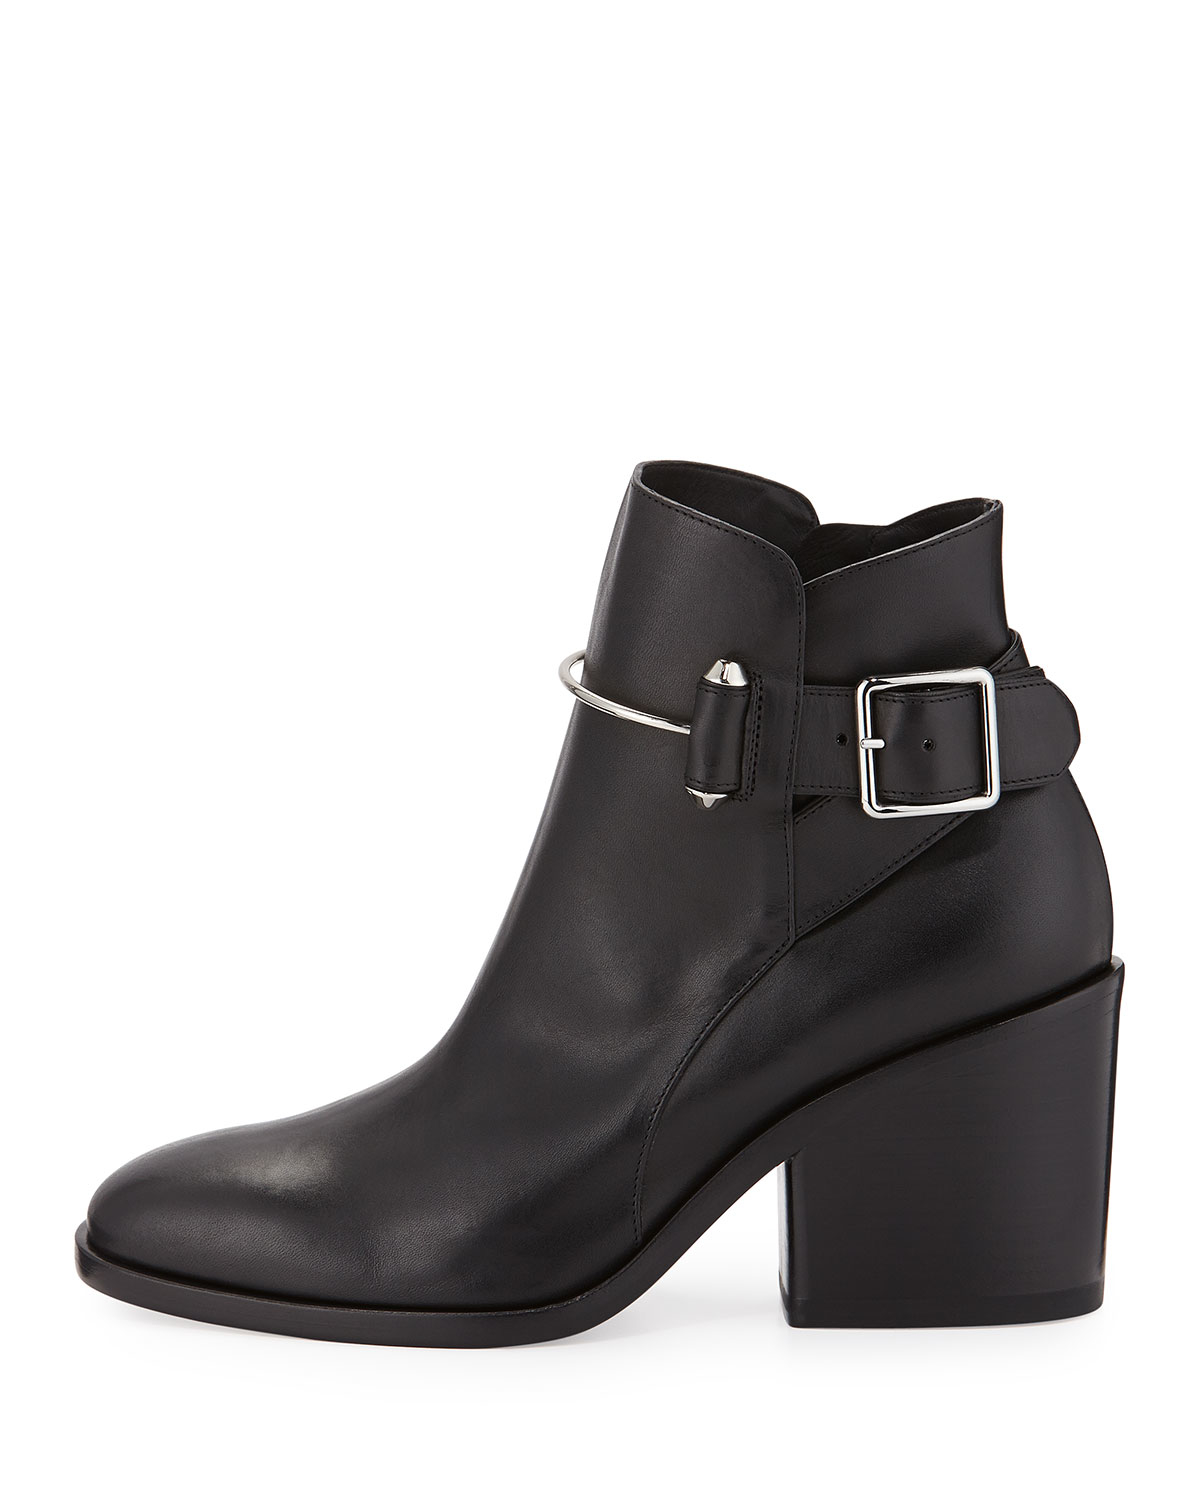 Lyst - Balenciaga Leather Chunky-heel Ankle Boot in Black